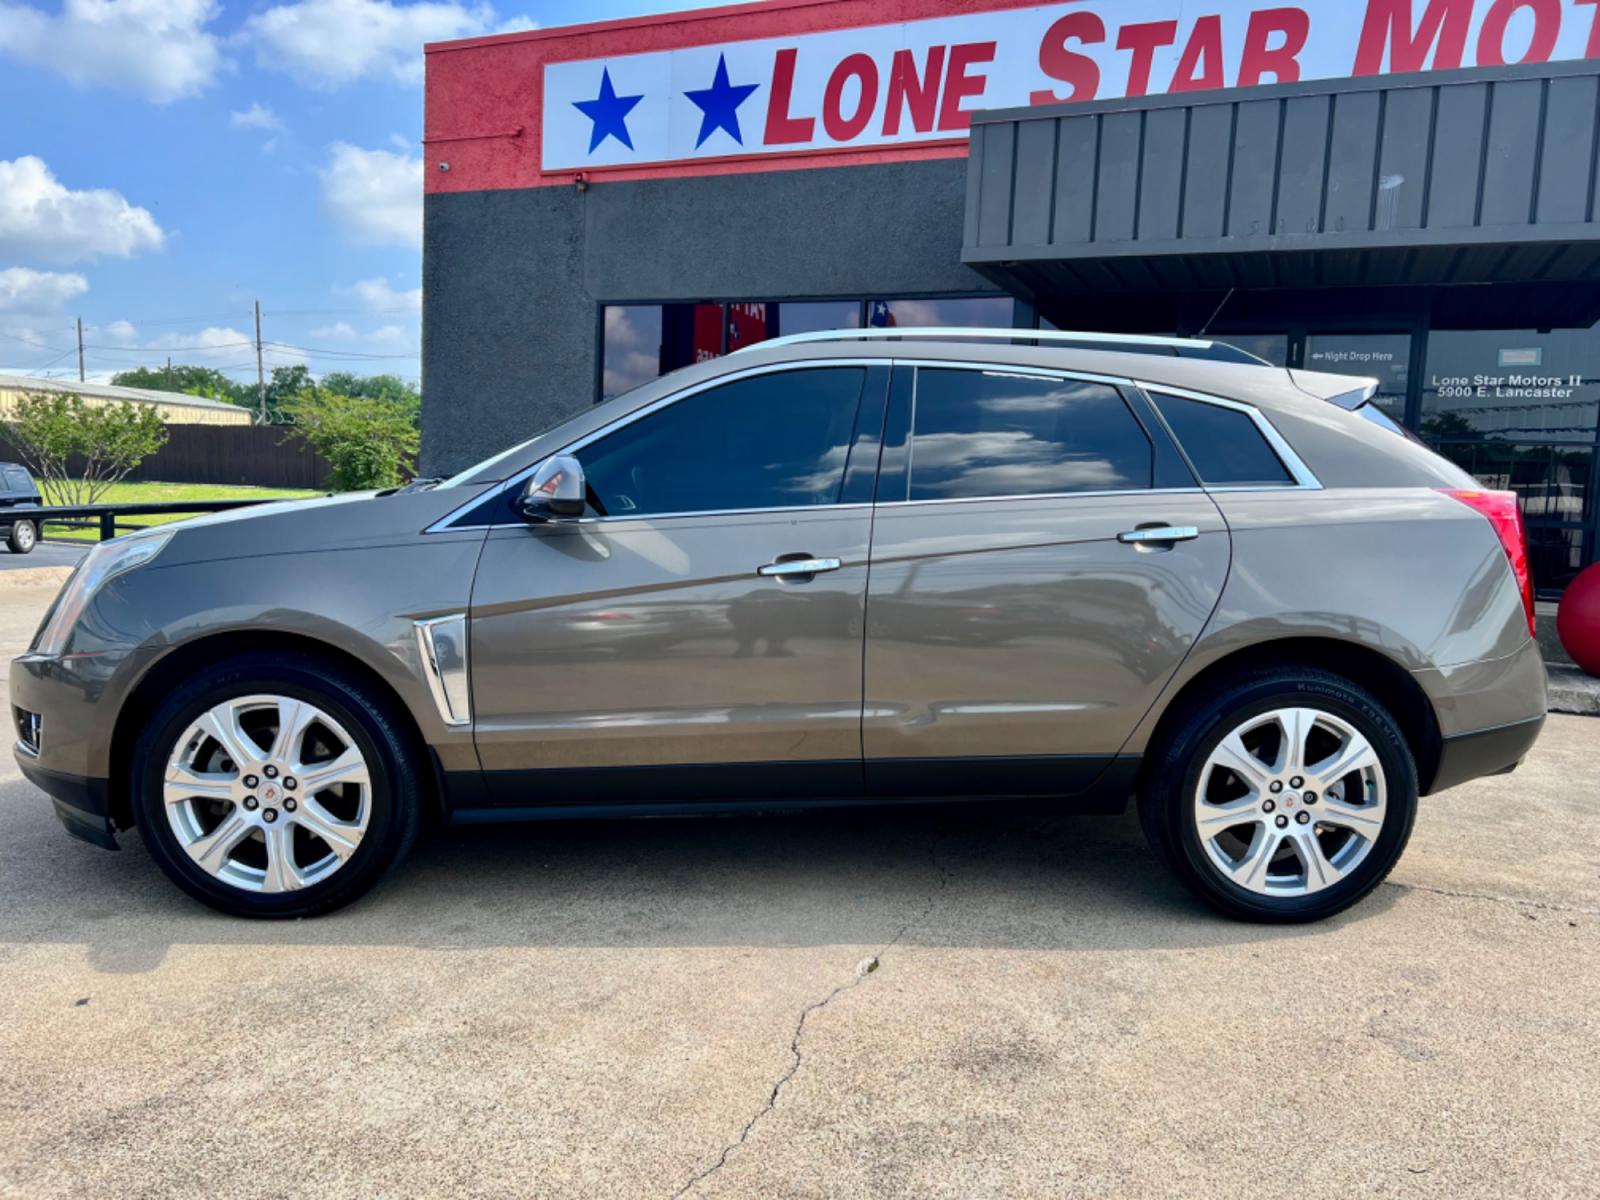 2014 PEWTER CADILLAC SRX (3GYFNDE35ES) , located at 5900 E. Lancaster Ave., Fort Worth, TX, 76112, (817) 457-5456, 0.000000, 0.000000 - This is a 2014 CADILLAC SRX LUXURY 4 DR WAGON that is in excellent condition. The interior is clean with no rips or tears or stains. All power windows, door locks and seats. Ice cold AC for those hot Texas summer days. It is equipped with a CD player, AM/FM radio, AUX port, Bluetooth connectivity an - Photo #3